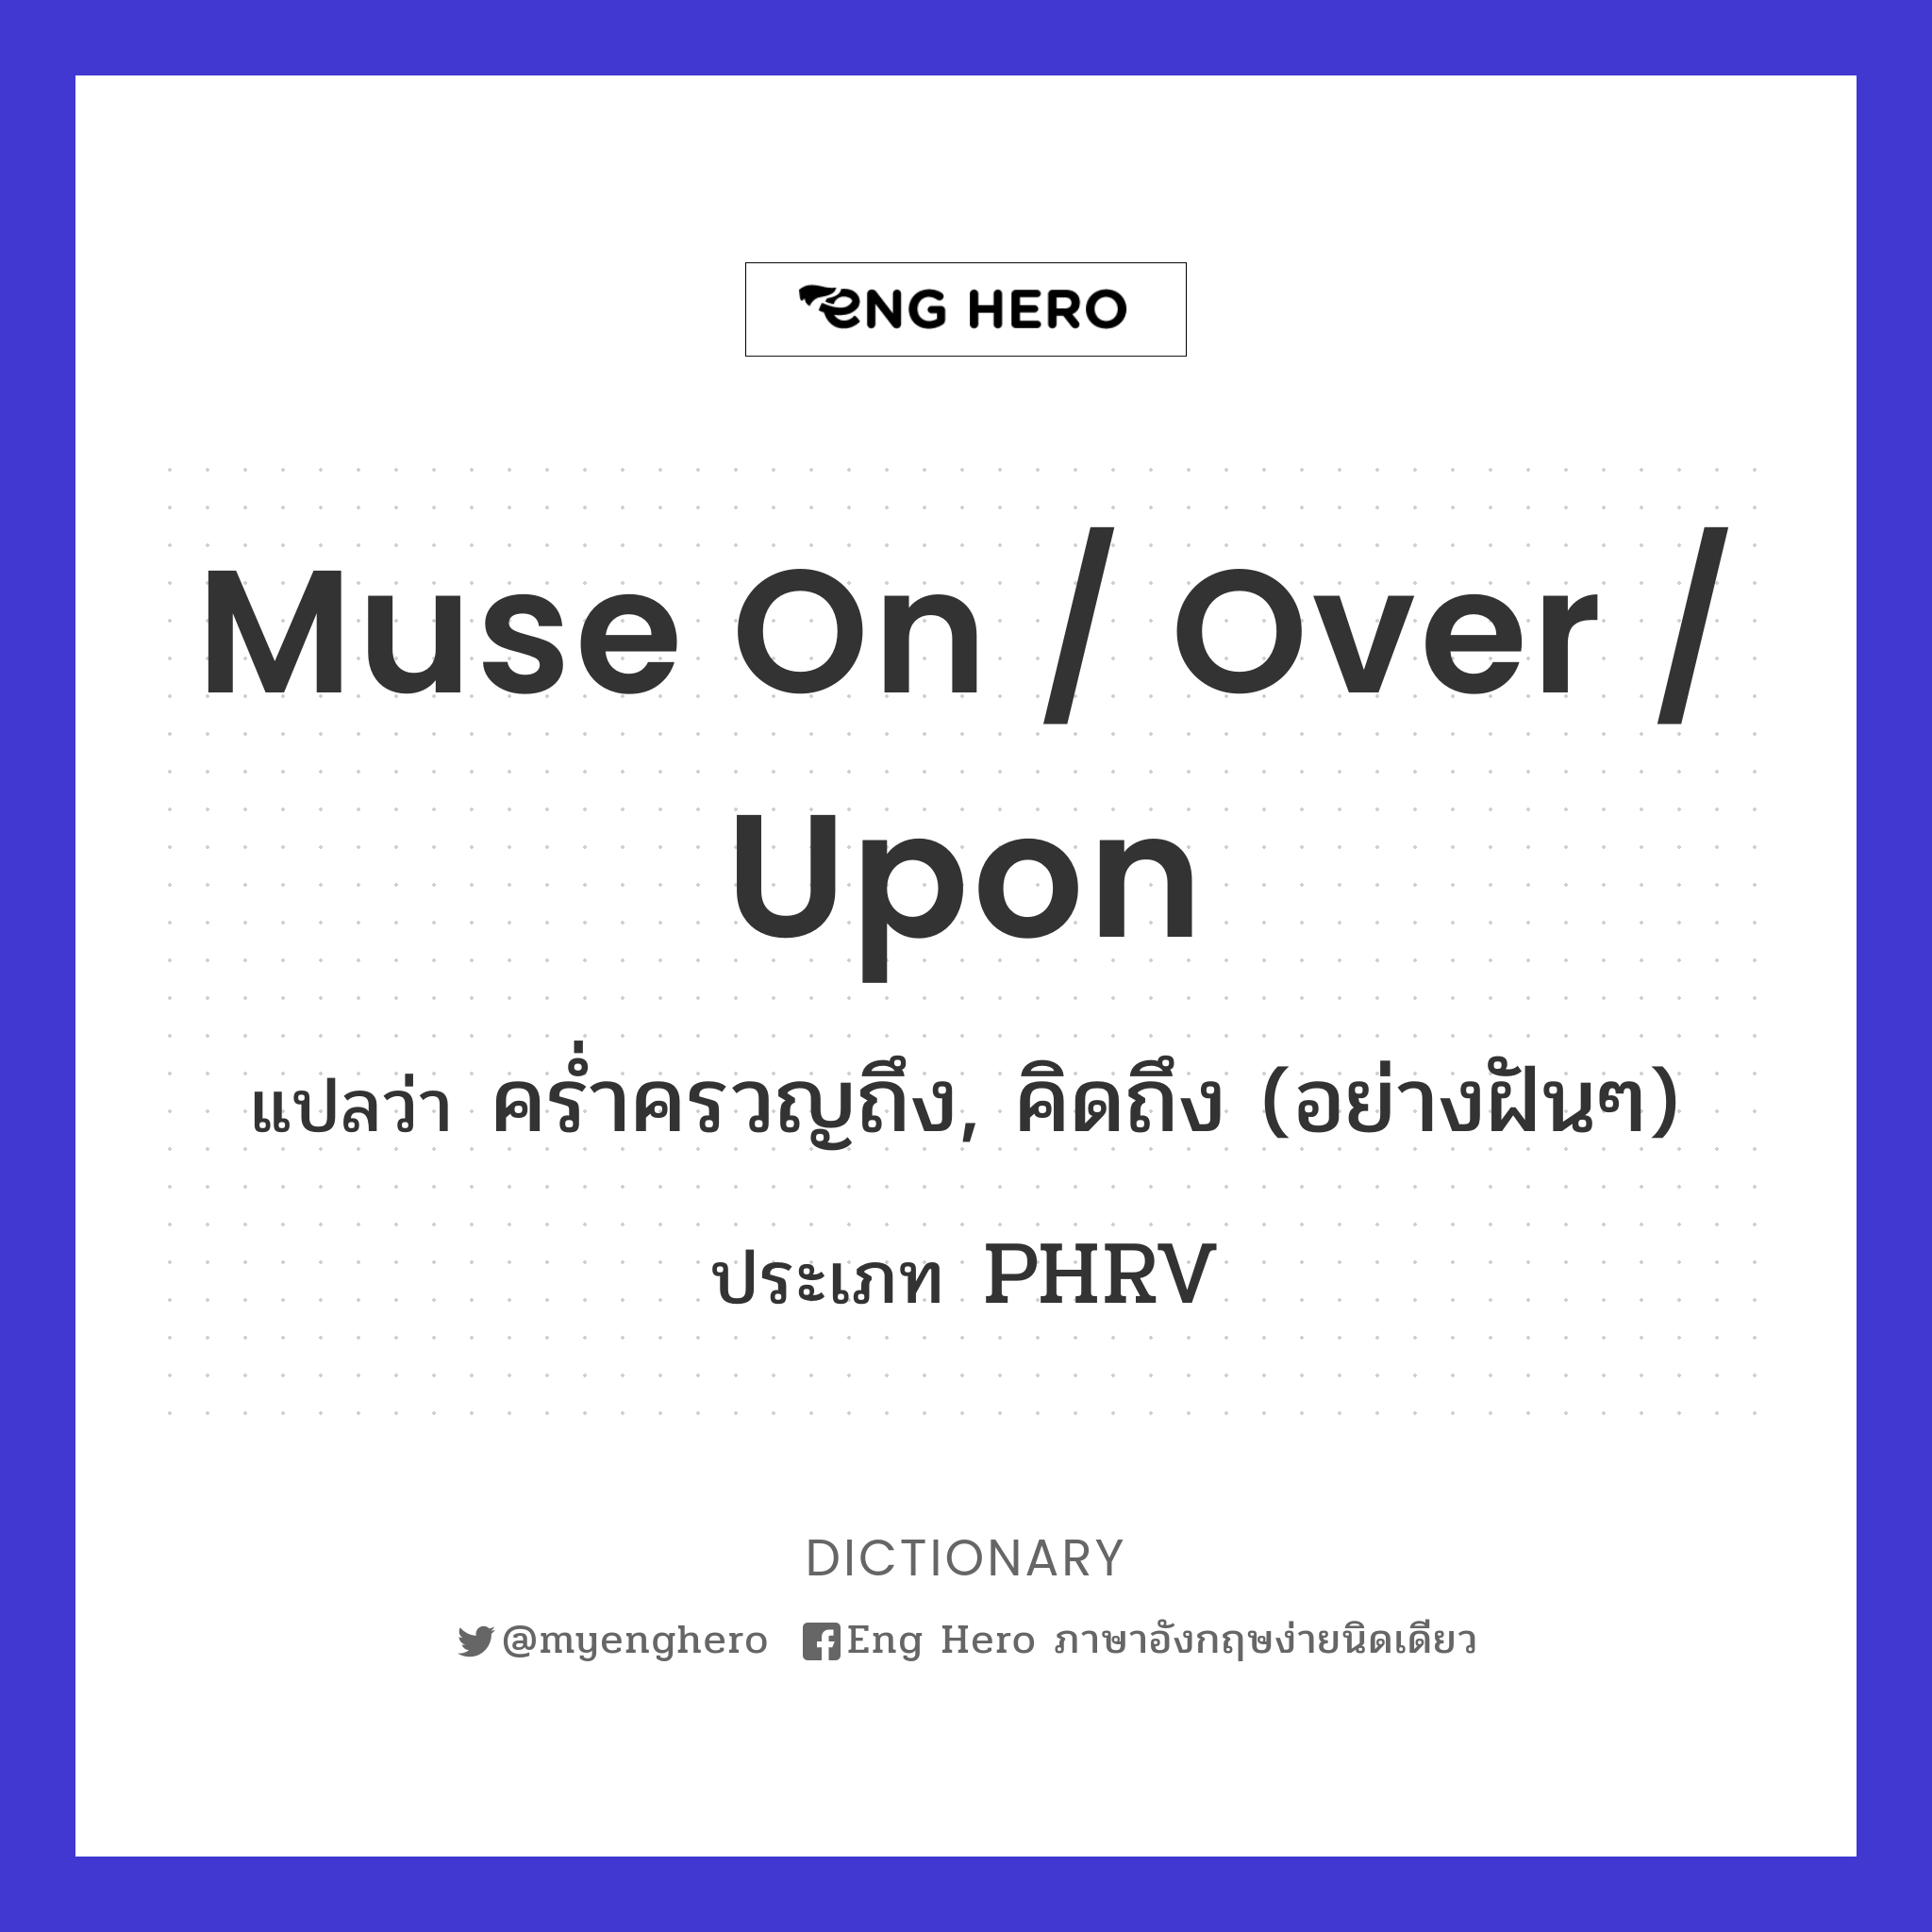 muse on / over / upon